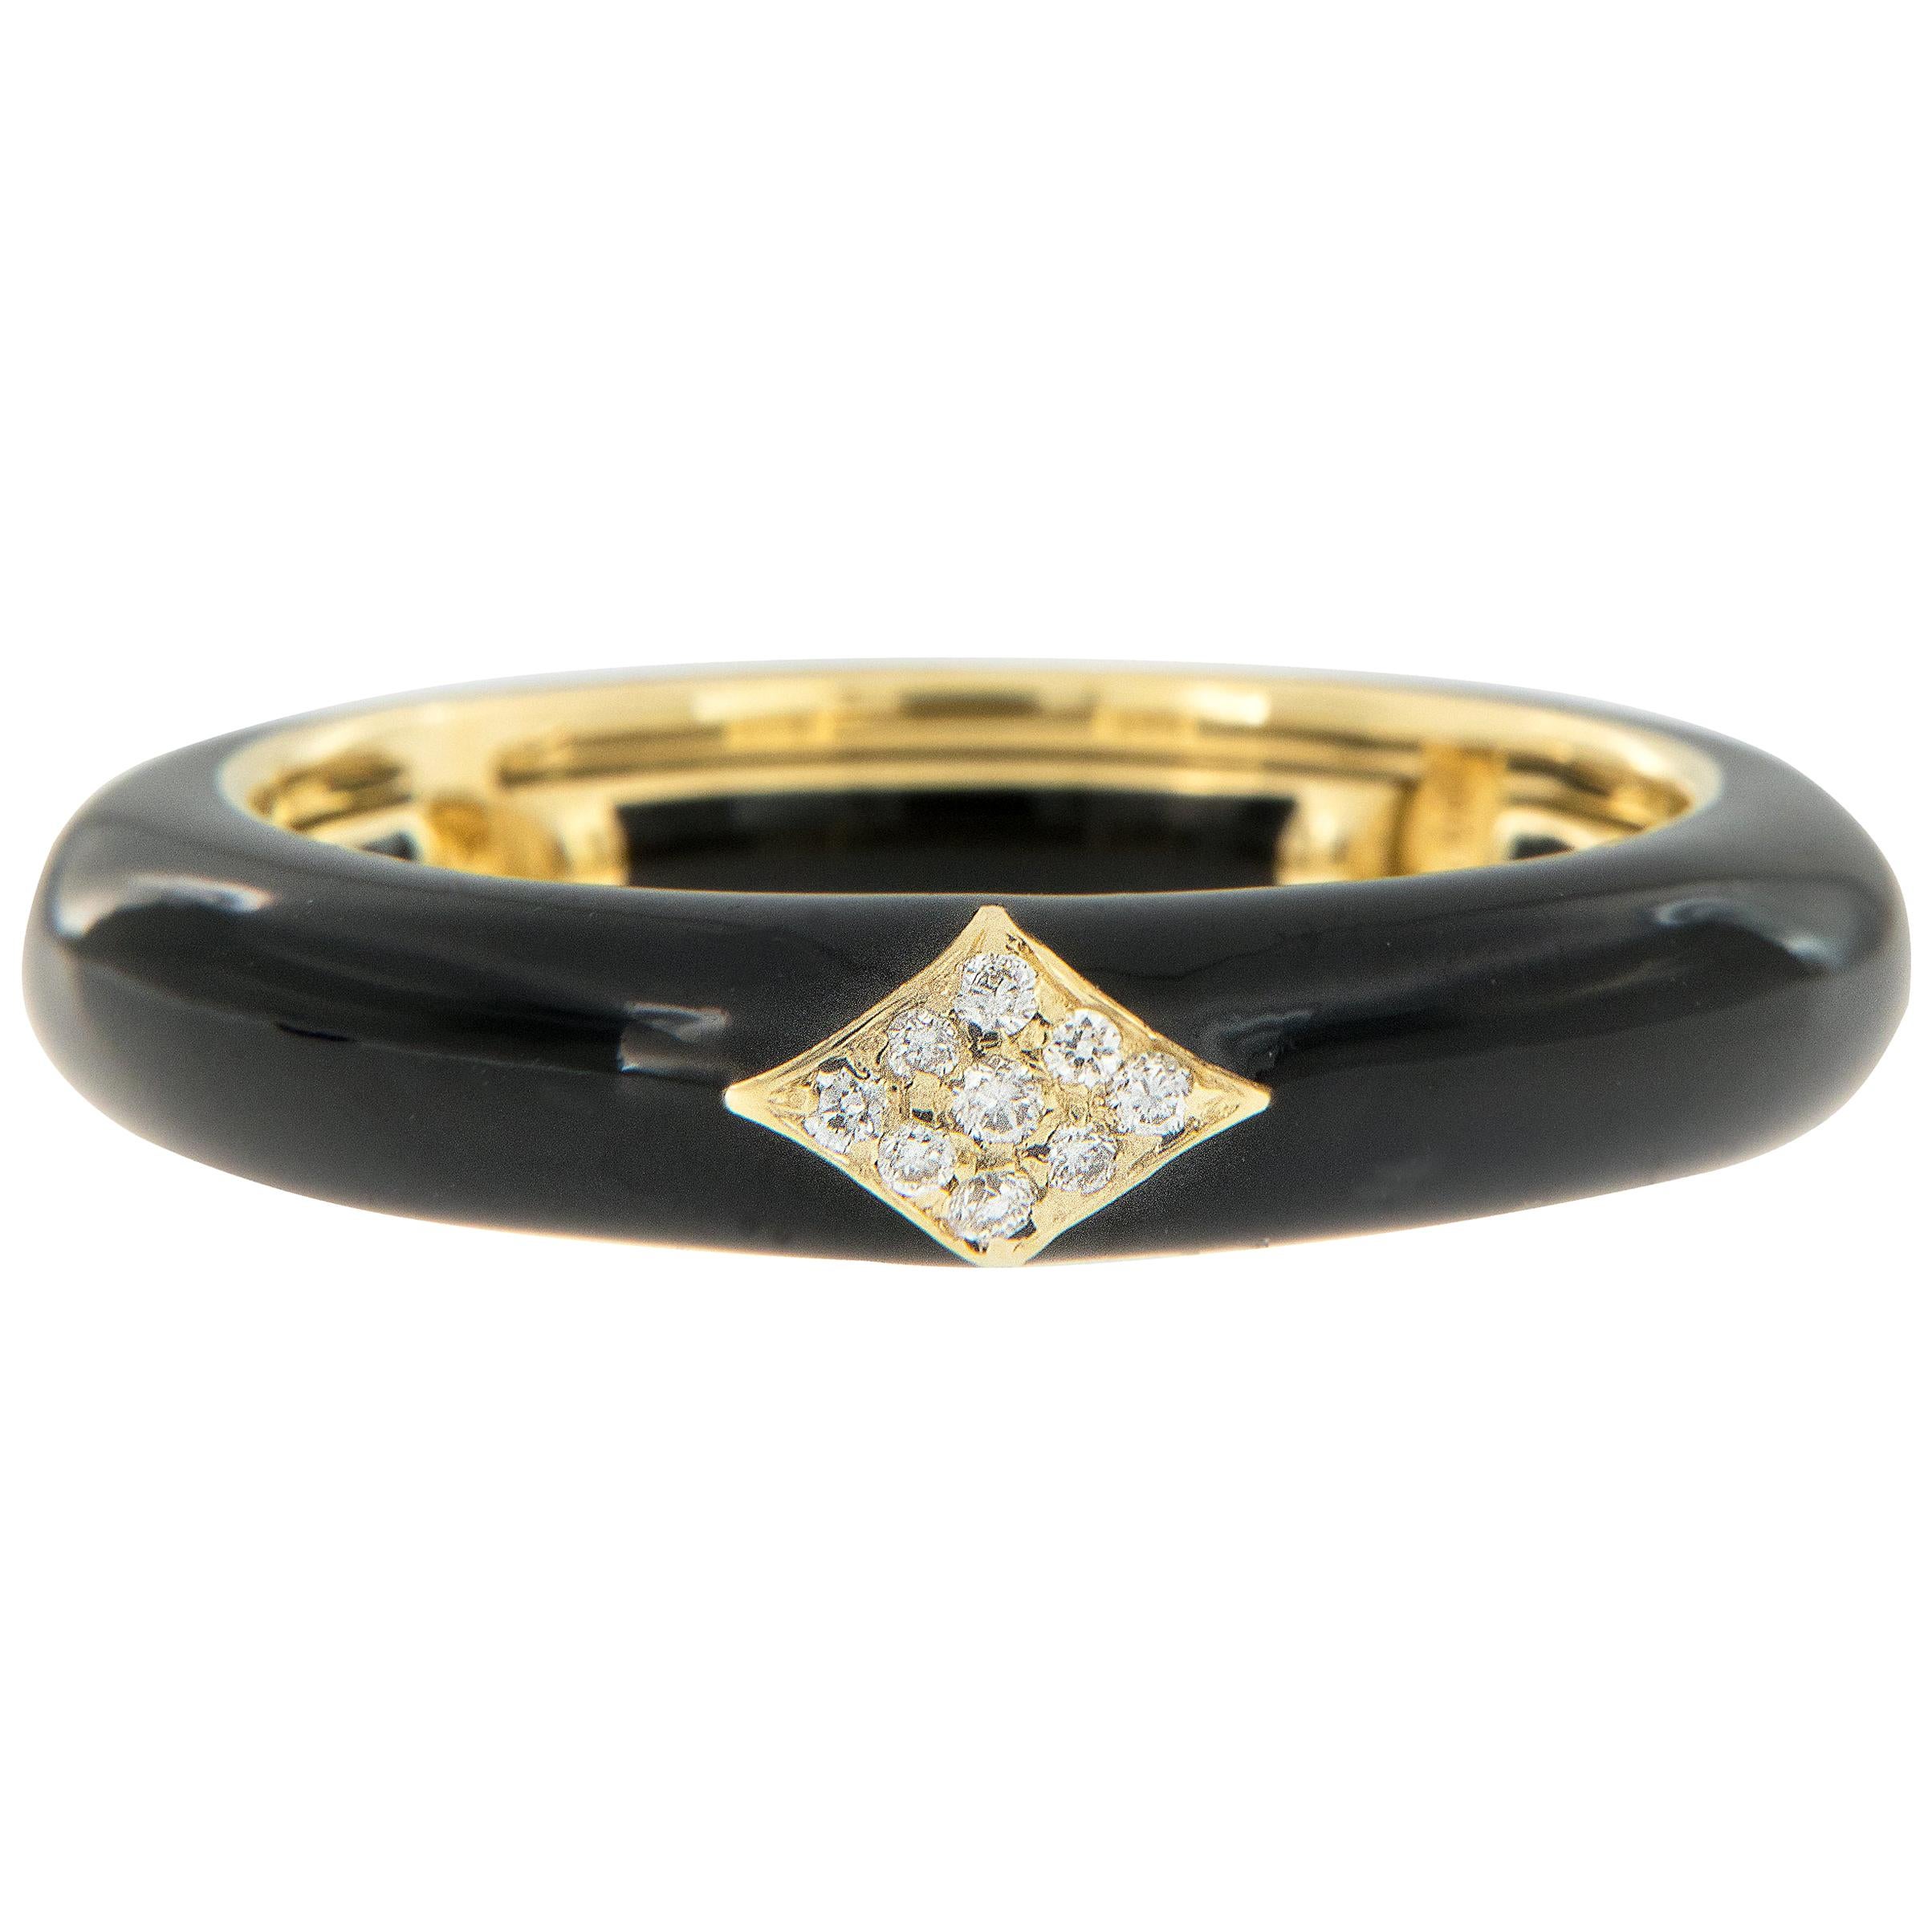 18 Karat Yellow Gold and Black Enamel and Diamond Adjustable Ring Made in Italy